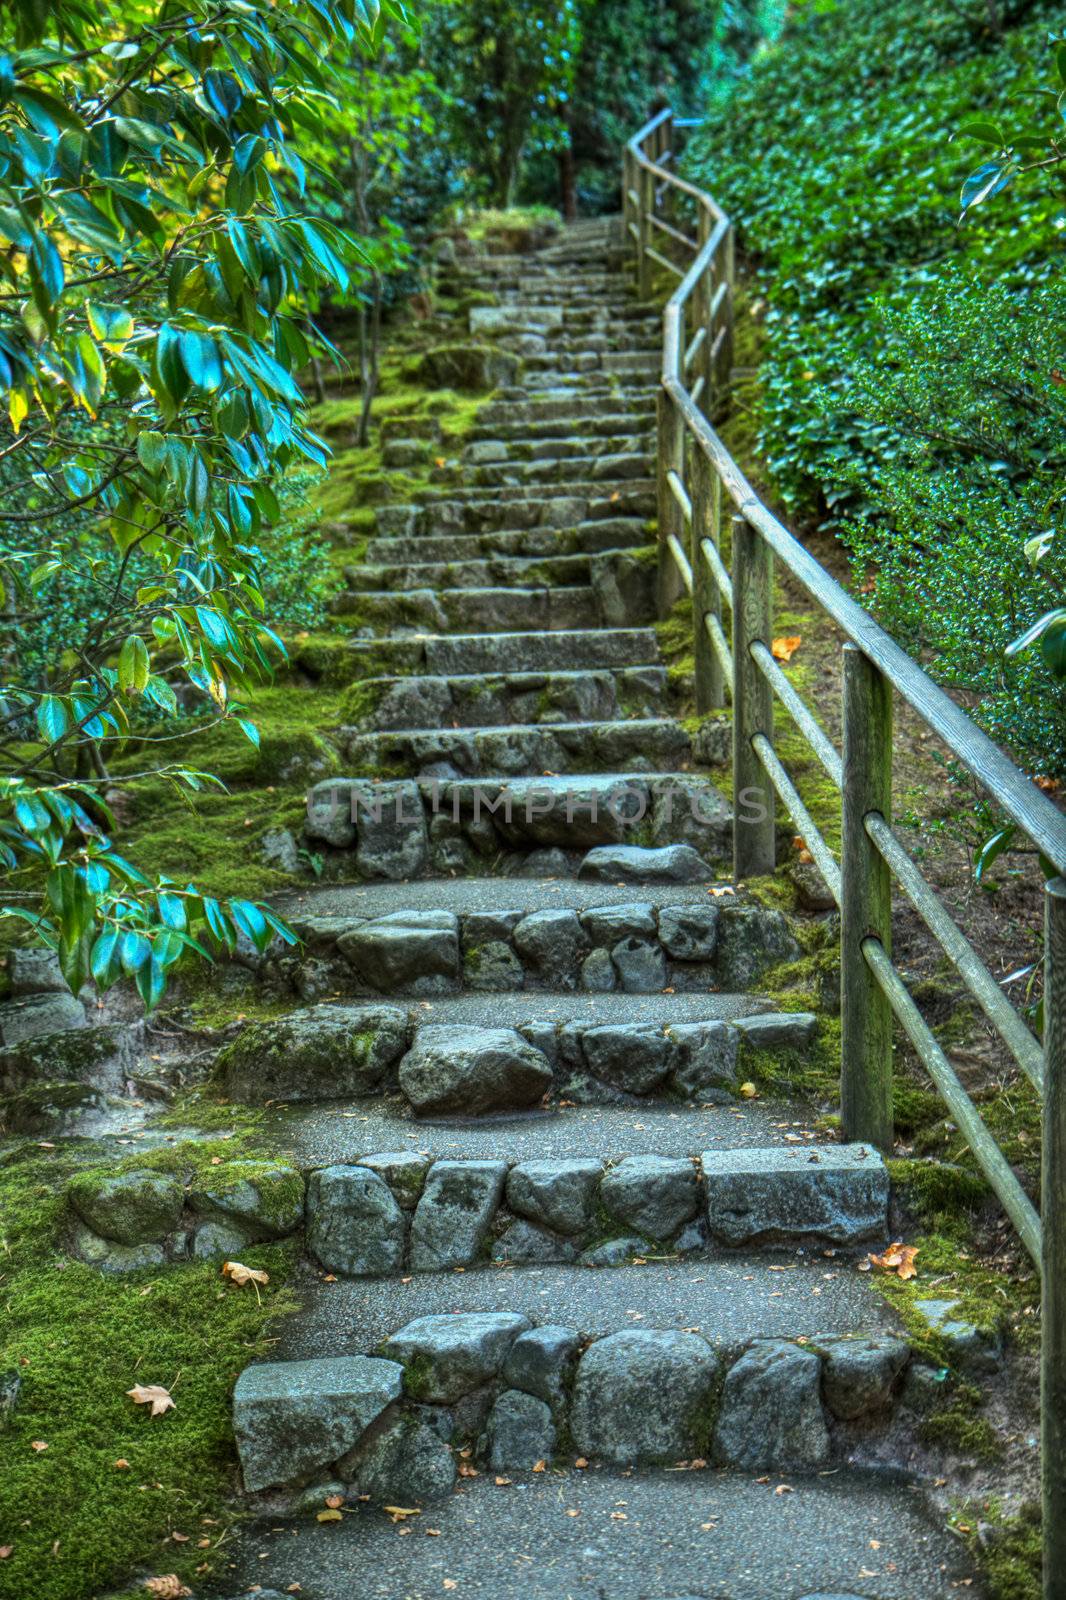 Japanese garden stone staircase covered in moss and surrounded by green foilage in HDR